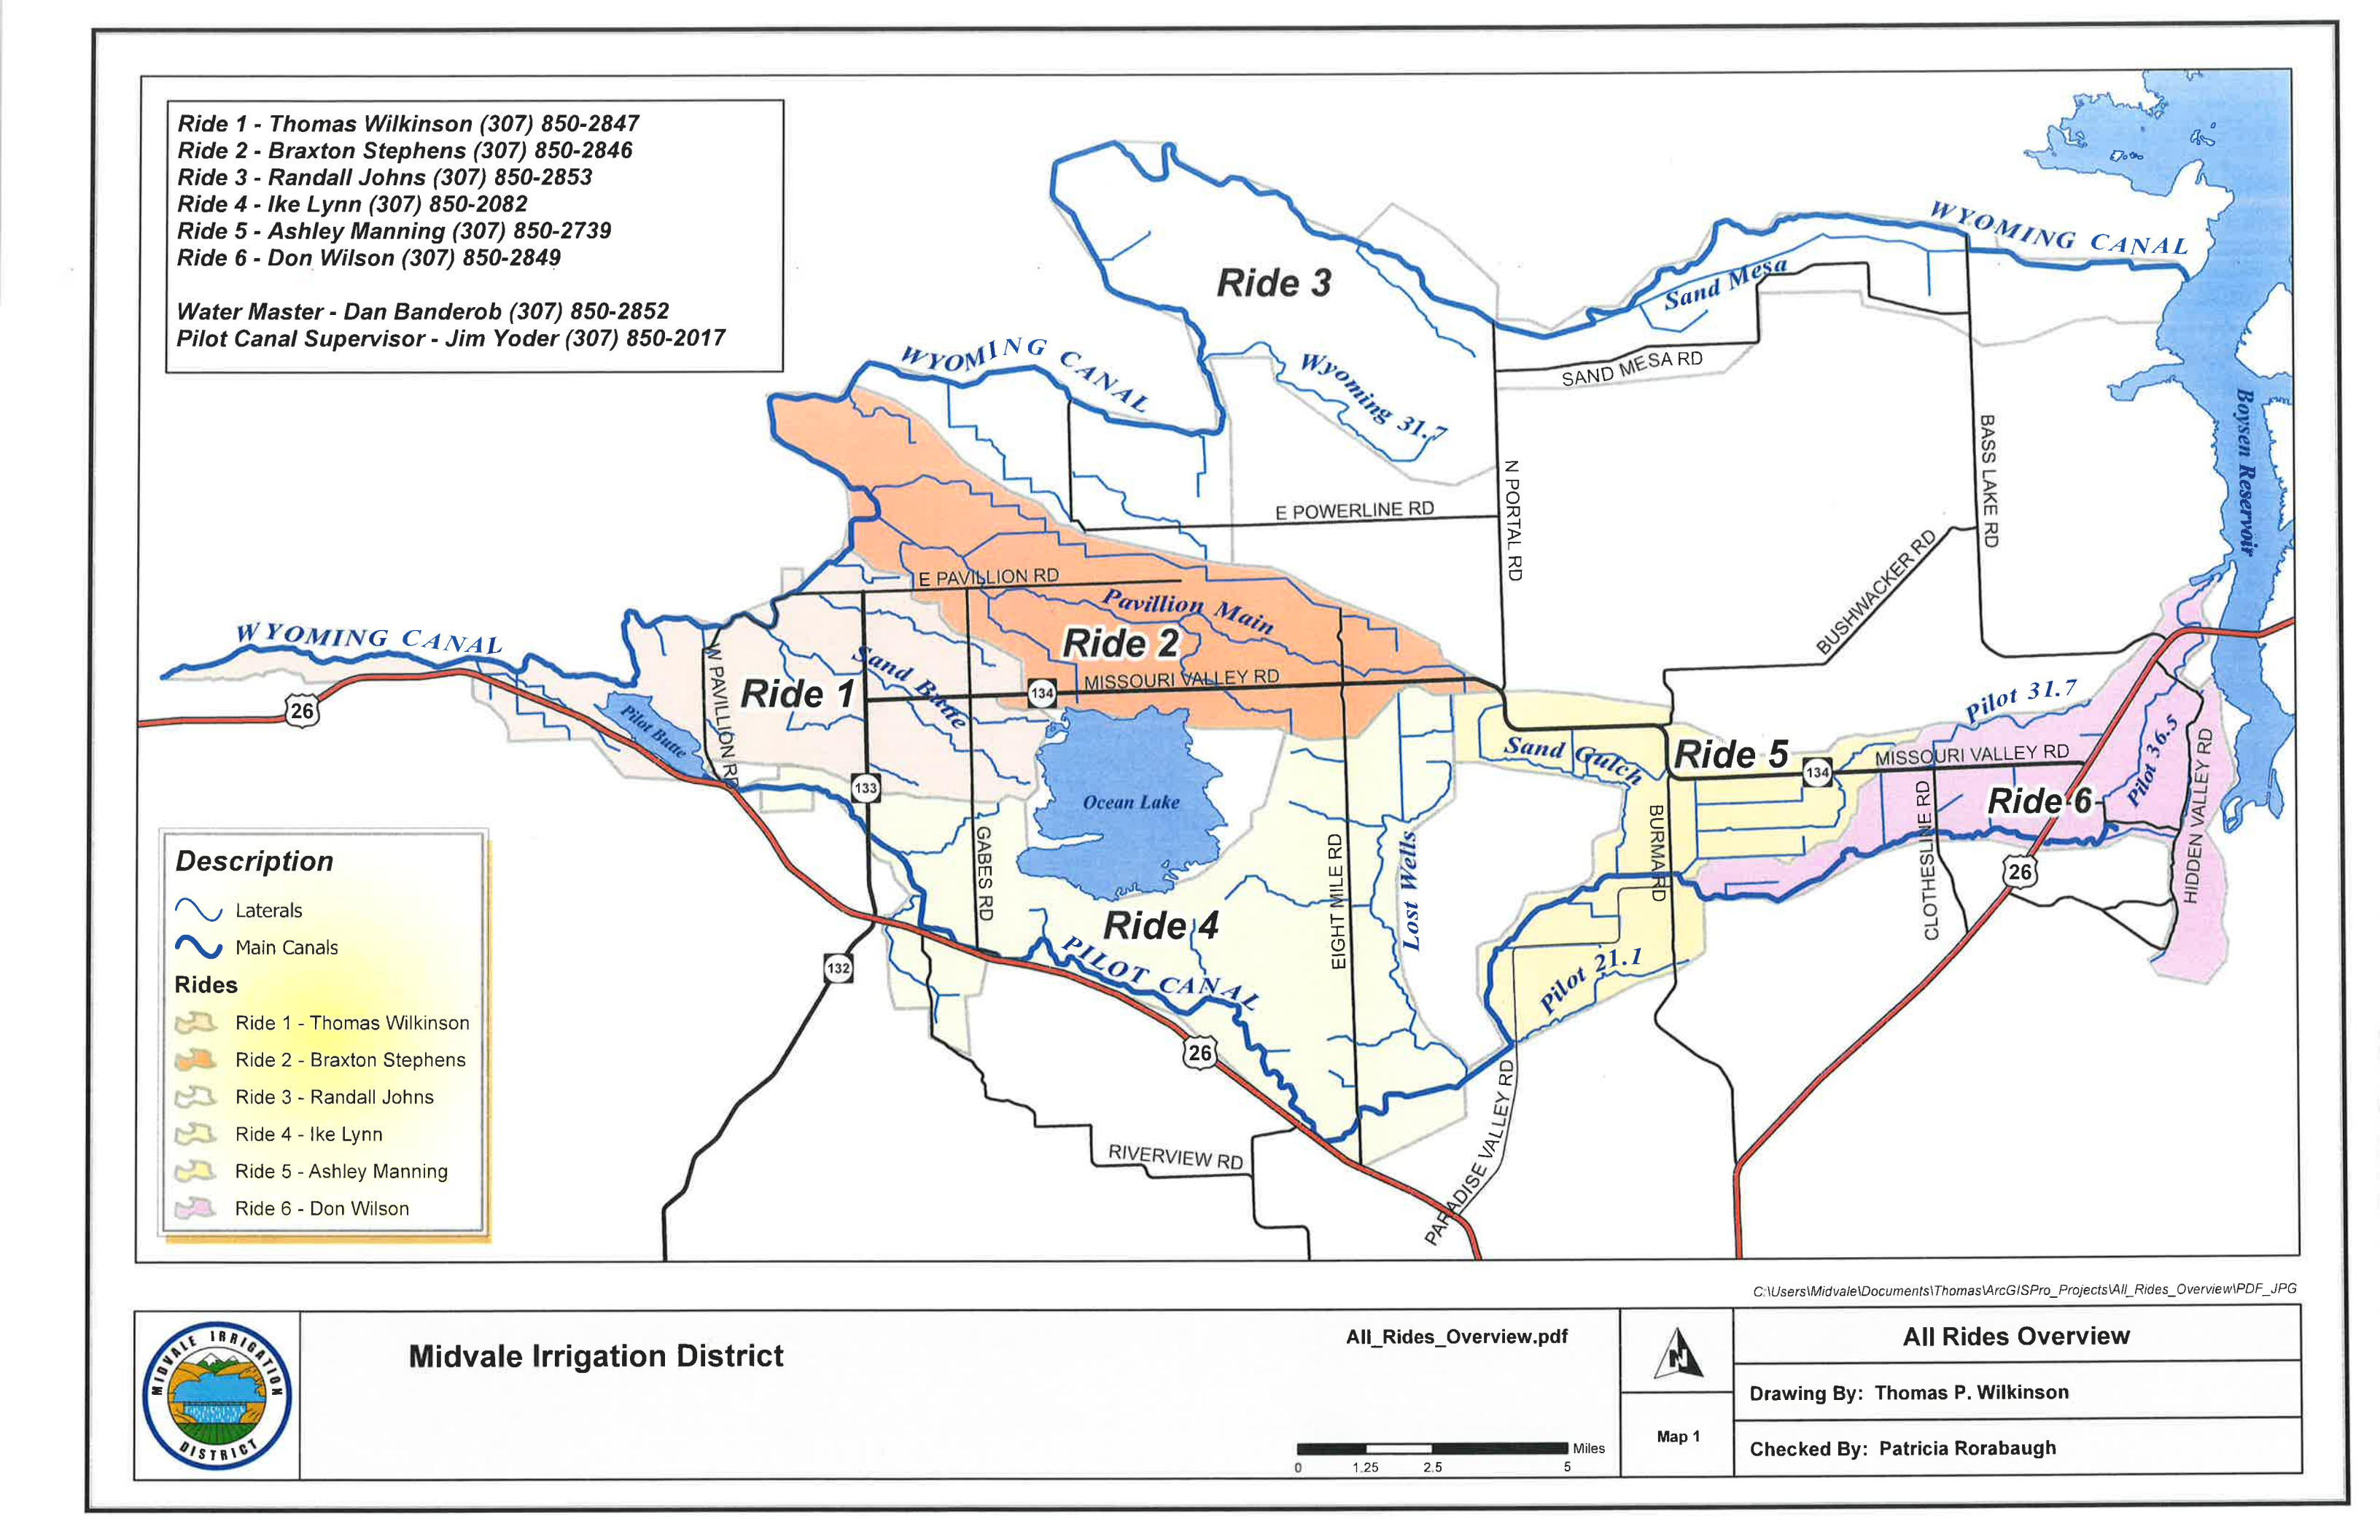 Midvale Irrigation District Rider's Map